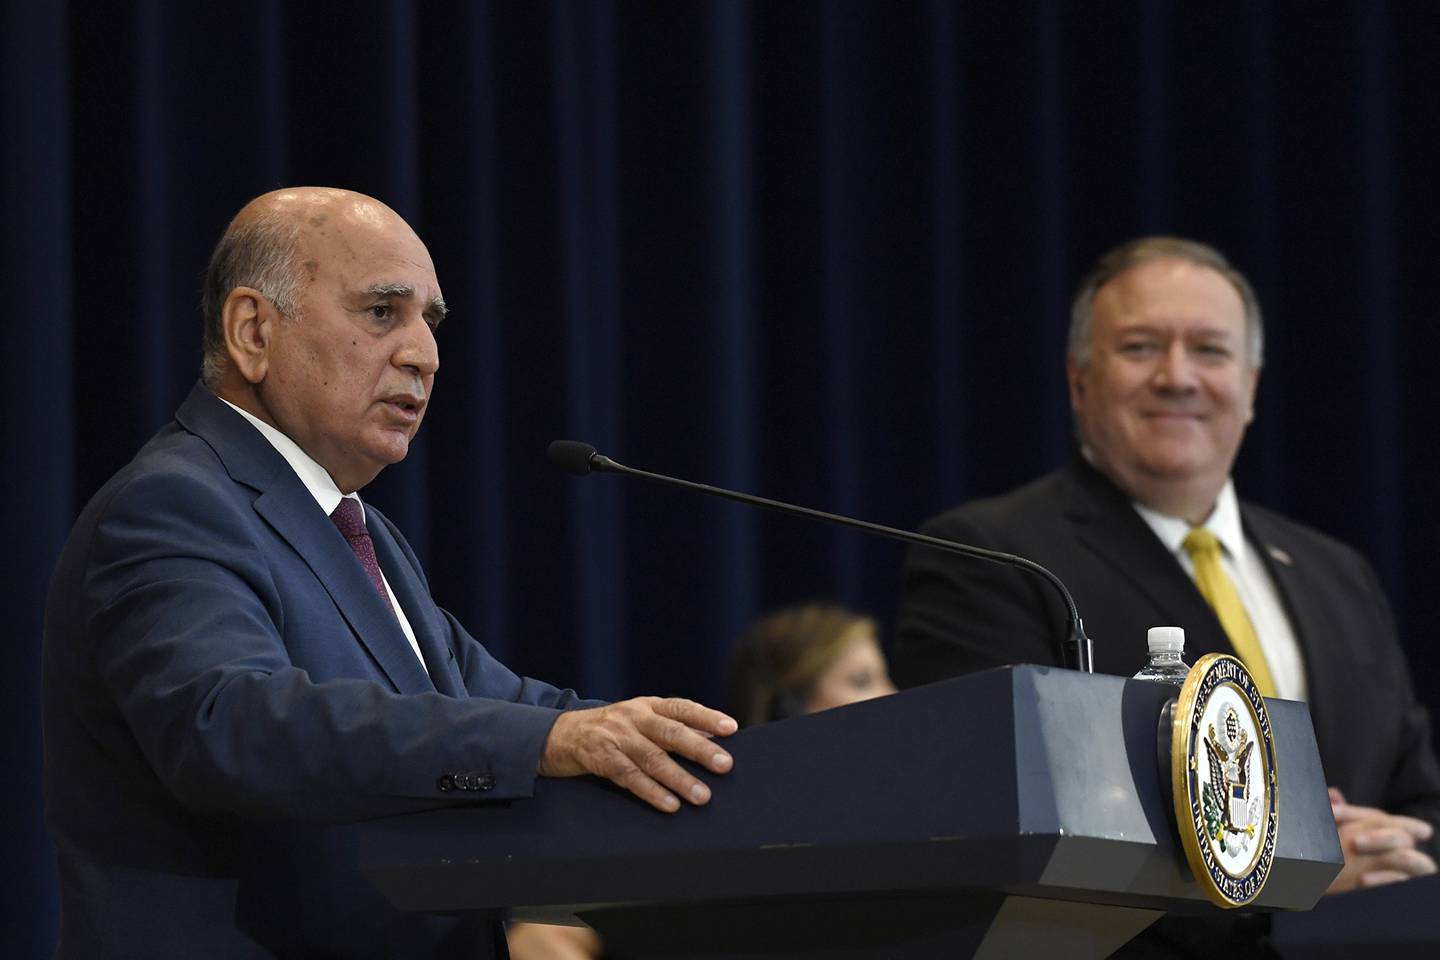 Iraqi Foreign Minister Fuad Hussein, left, speaks at the State Department in Washington, Wednesday, Aug. 19, 2020, during a news conference with Secretary of State Mike Pompeo, right.